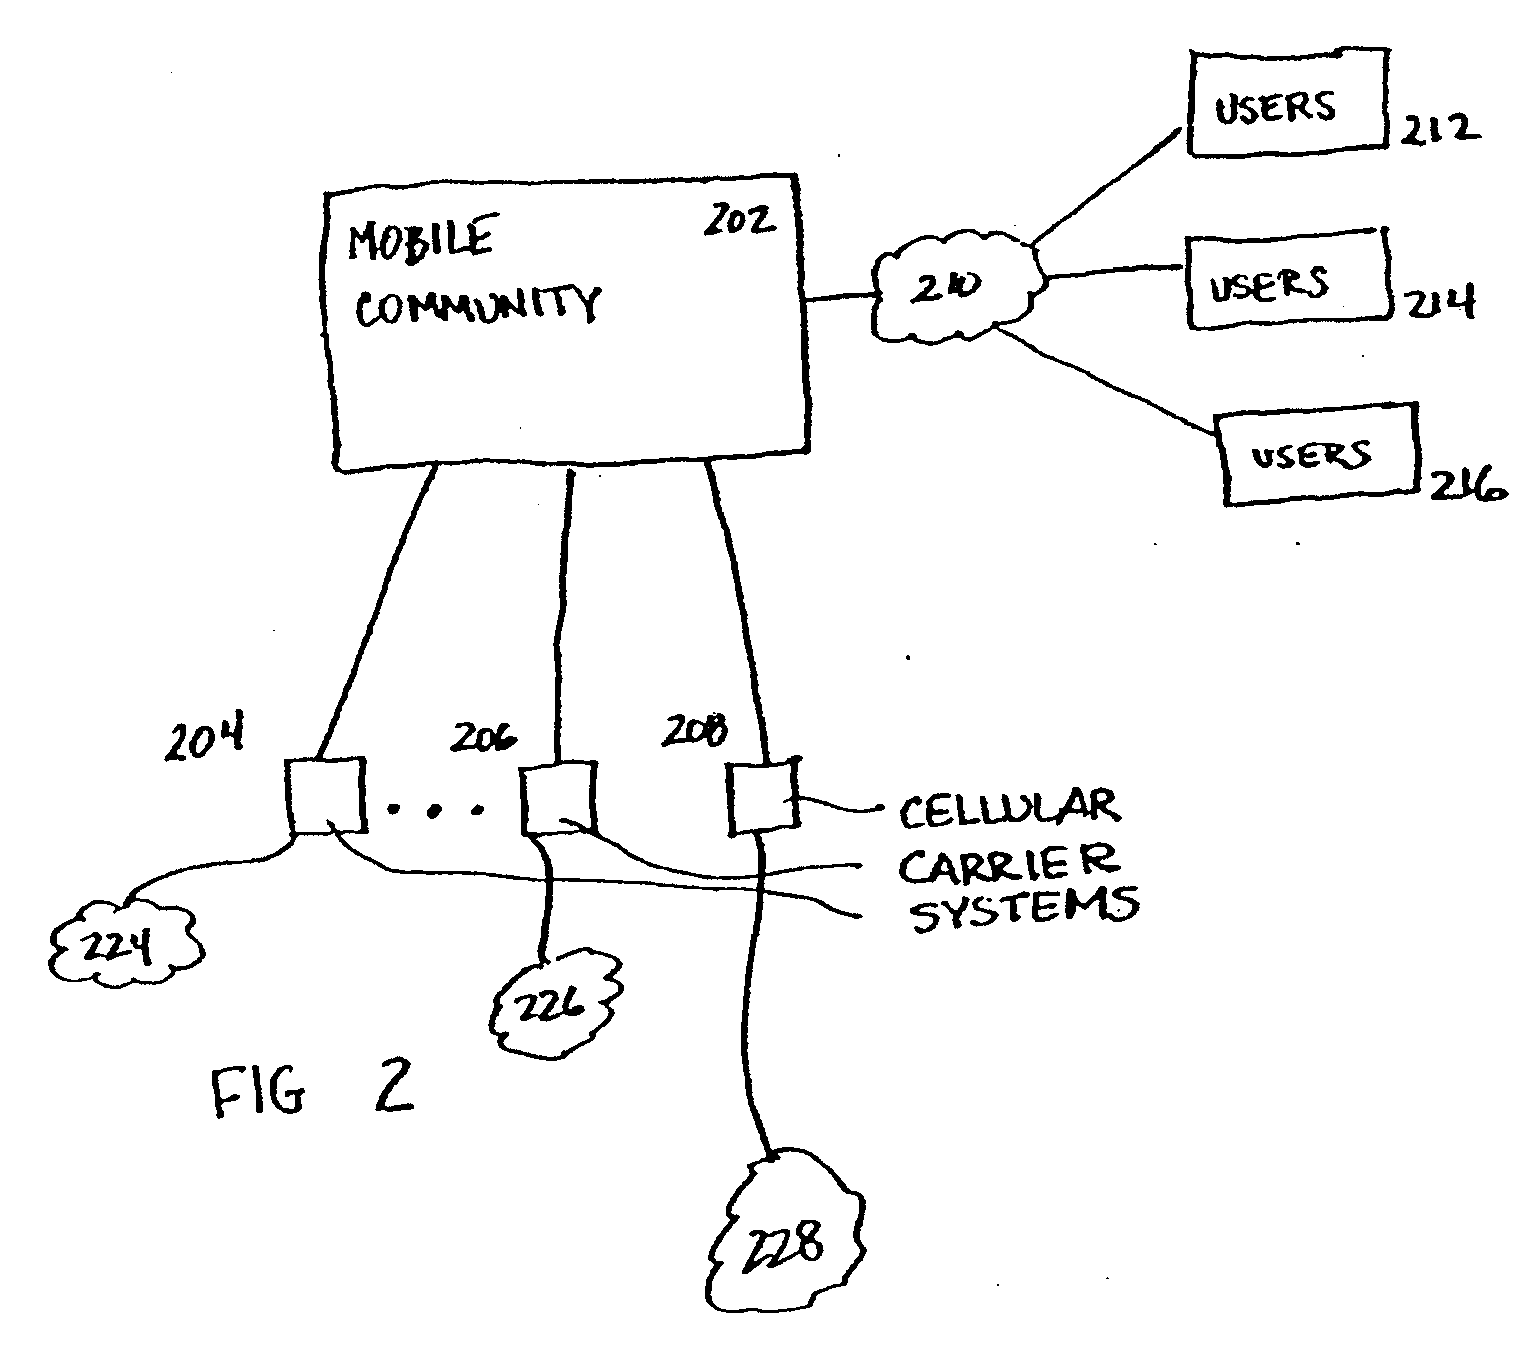 Systems and methods for automatic generation, registration and mobile phone billing of a pod using third party web page content